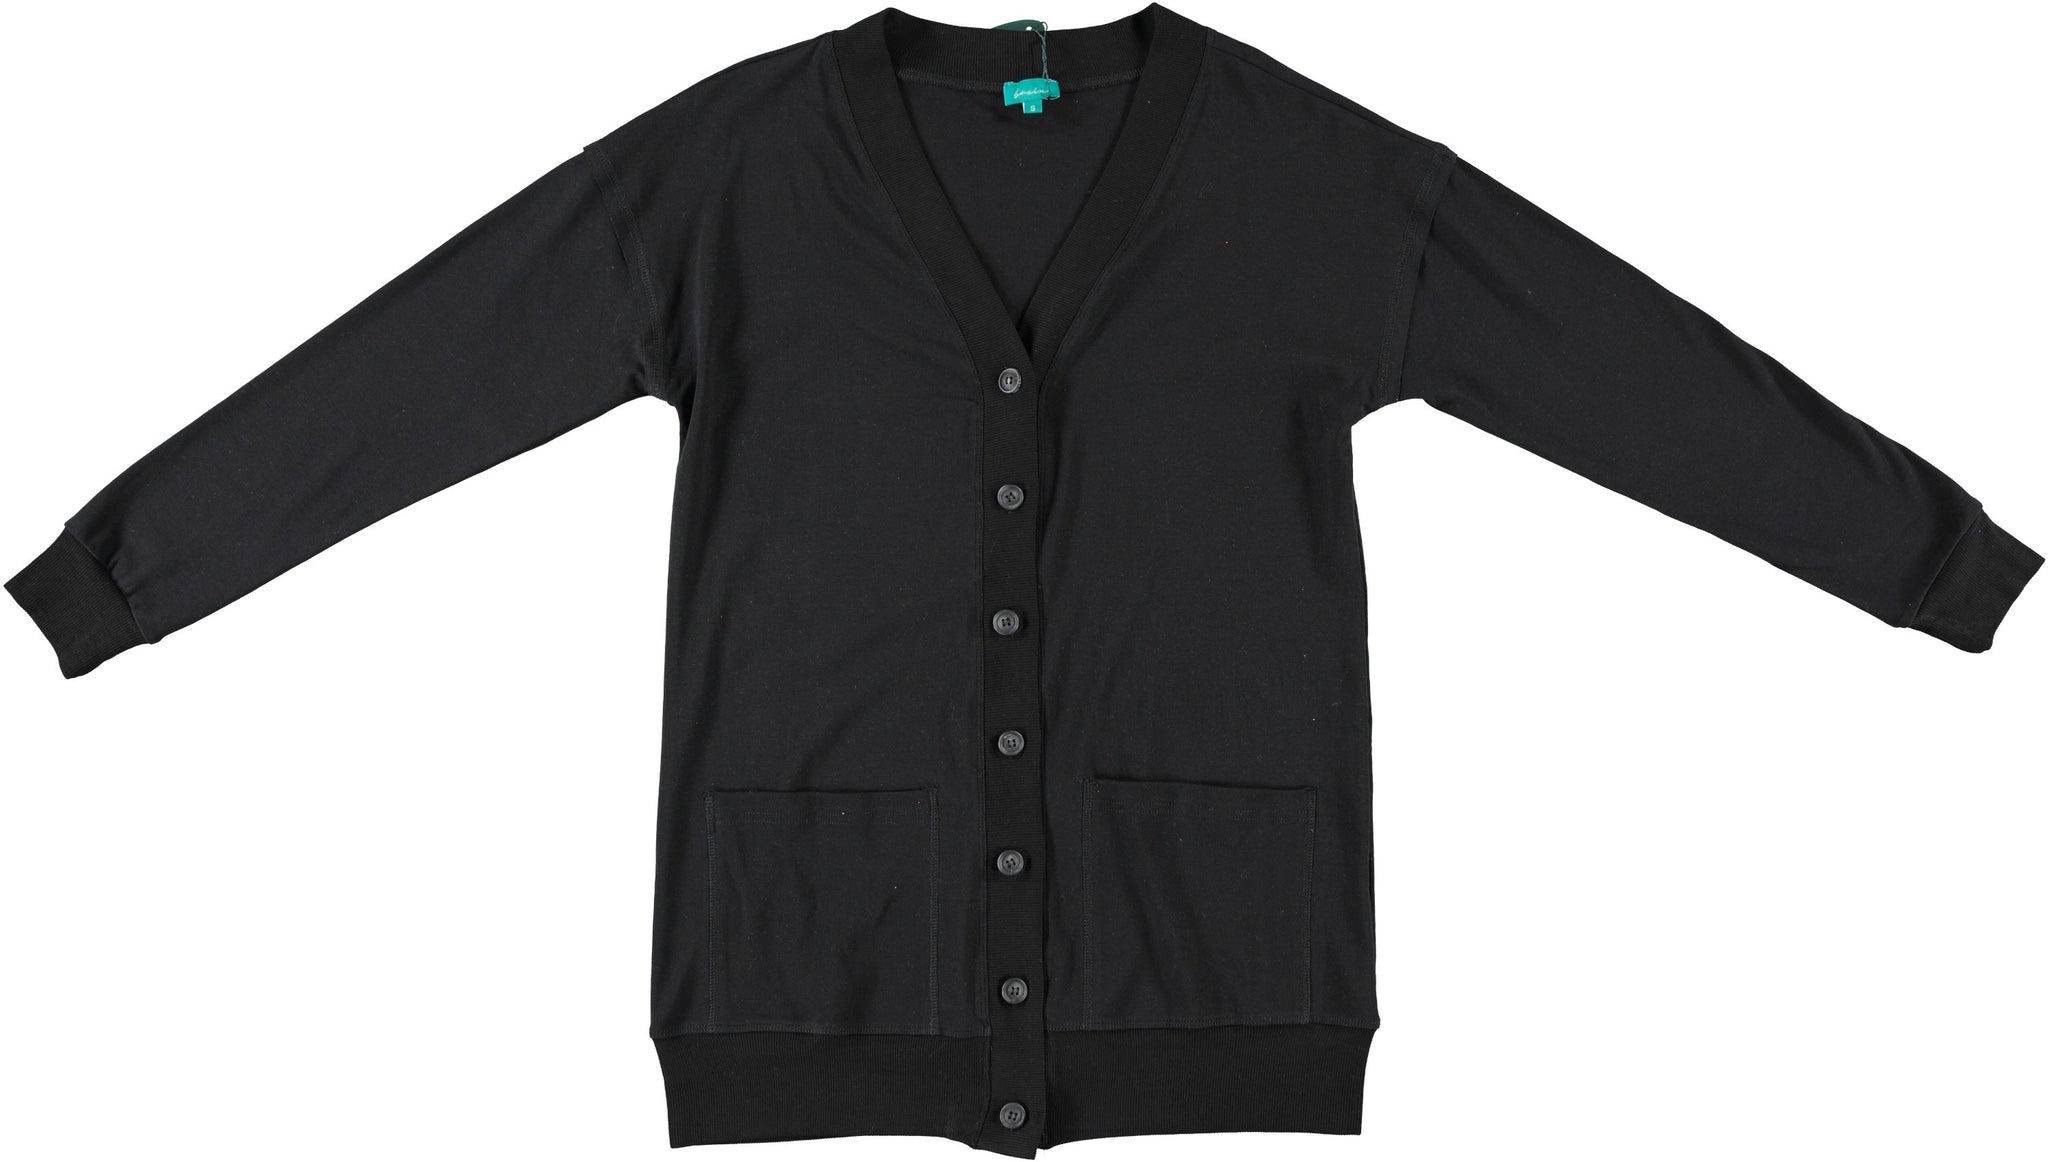 Black Cotton Cardigan With Matching Buttons And Pockets